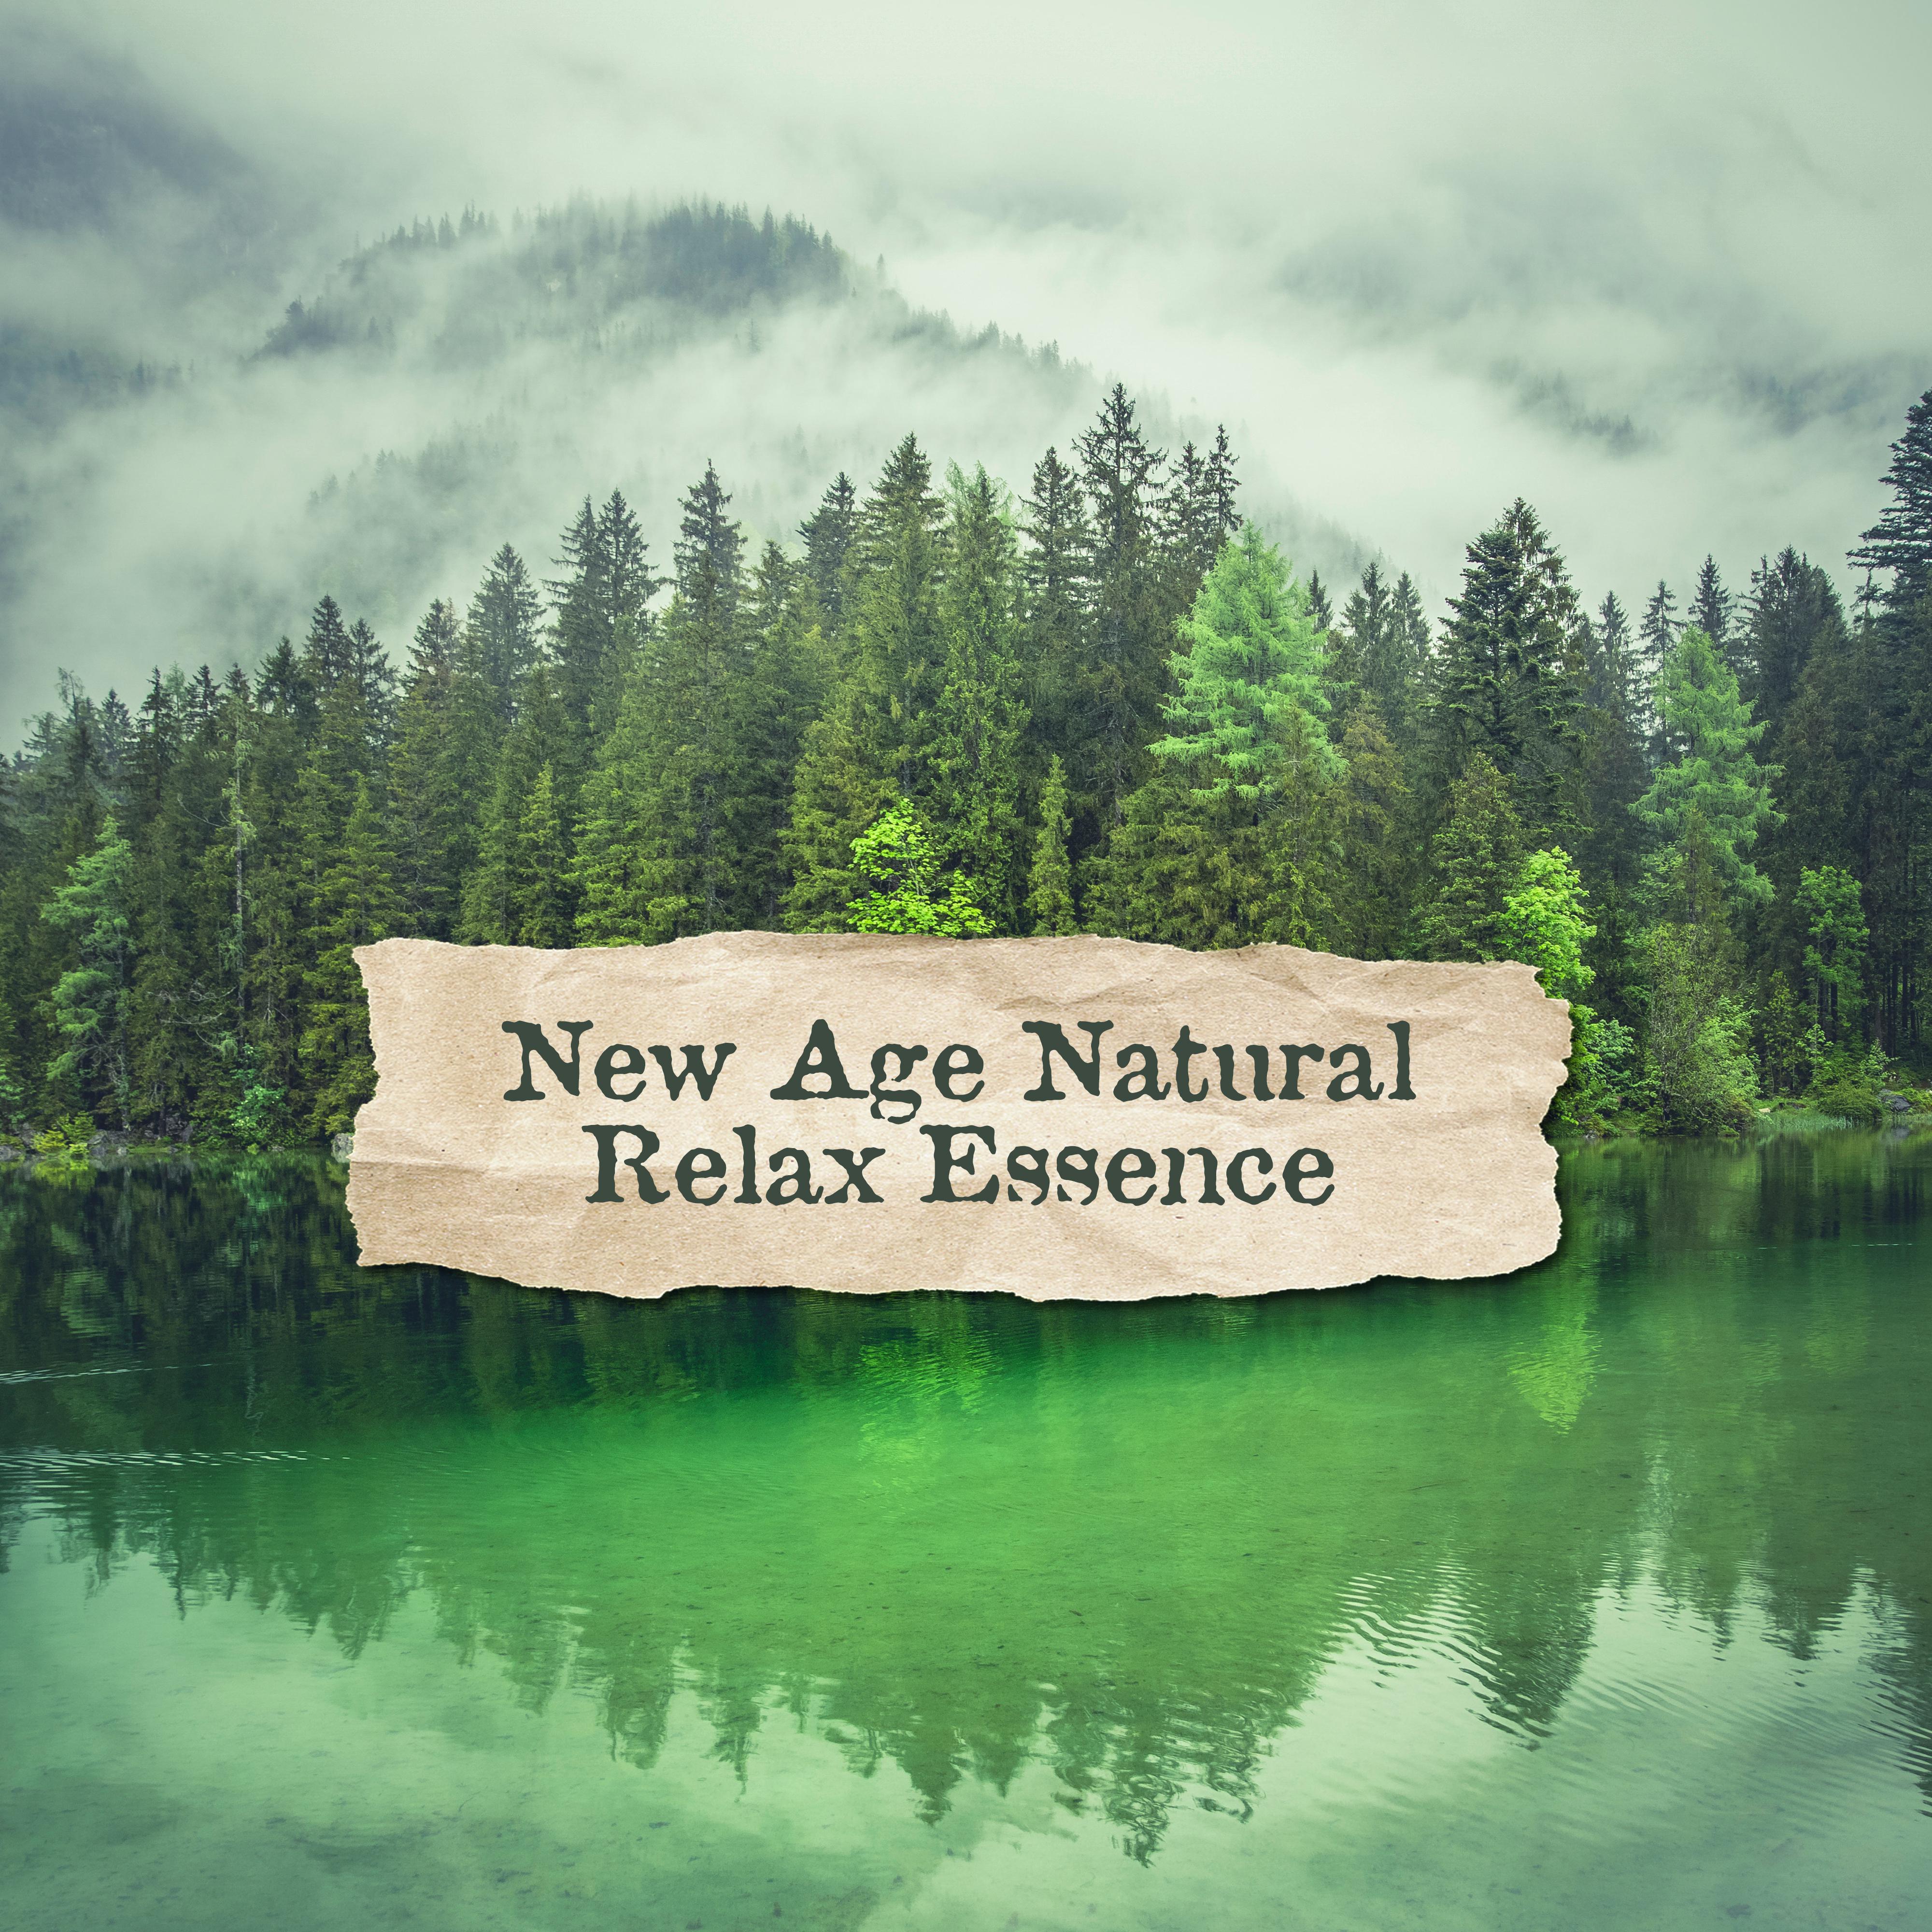 New Age Natural Relax Essence: 15 Soothing Songs with Nature Sounds for Pure Relaxing